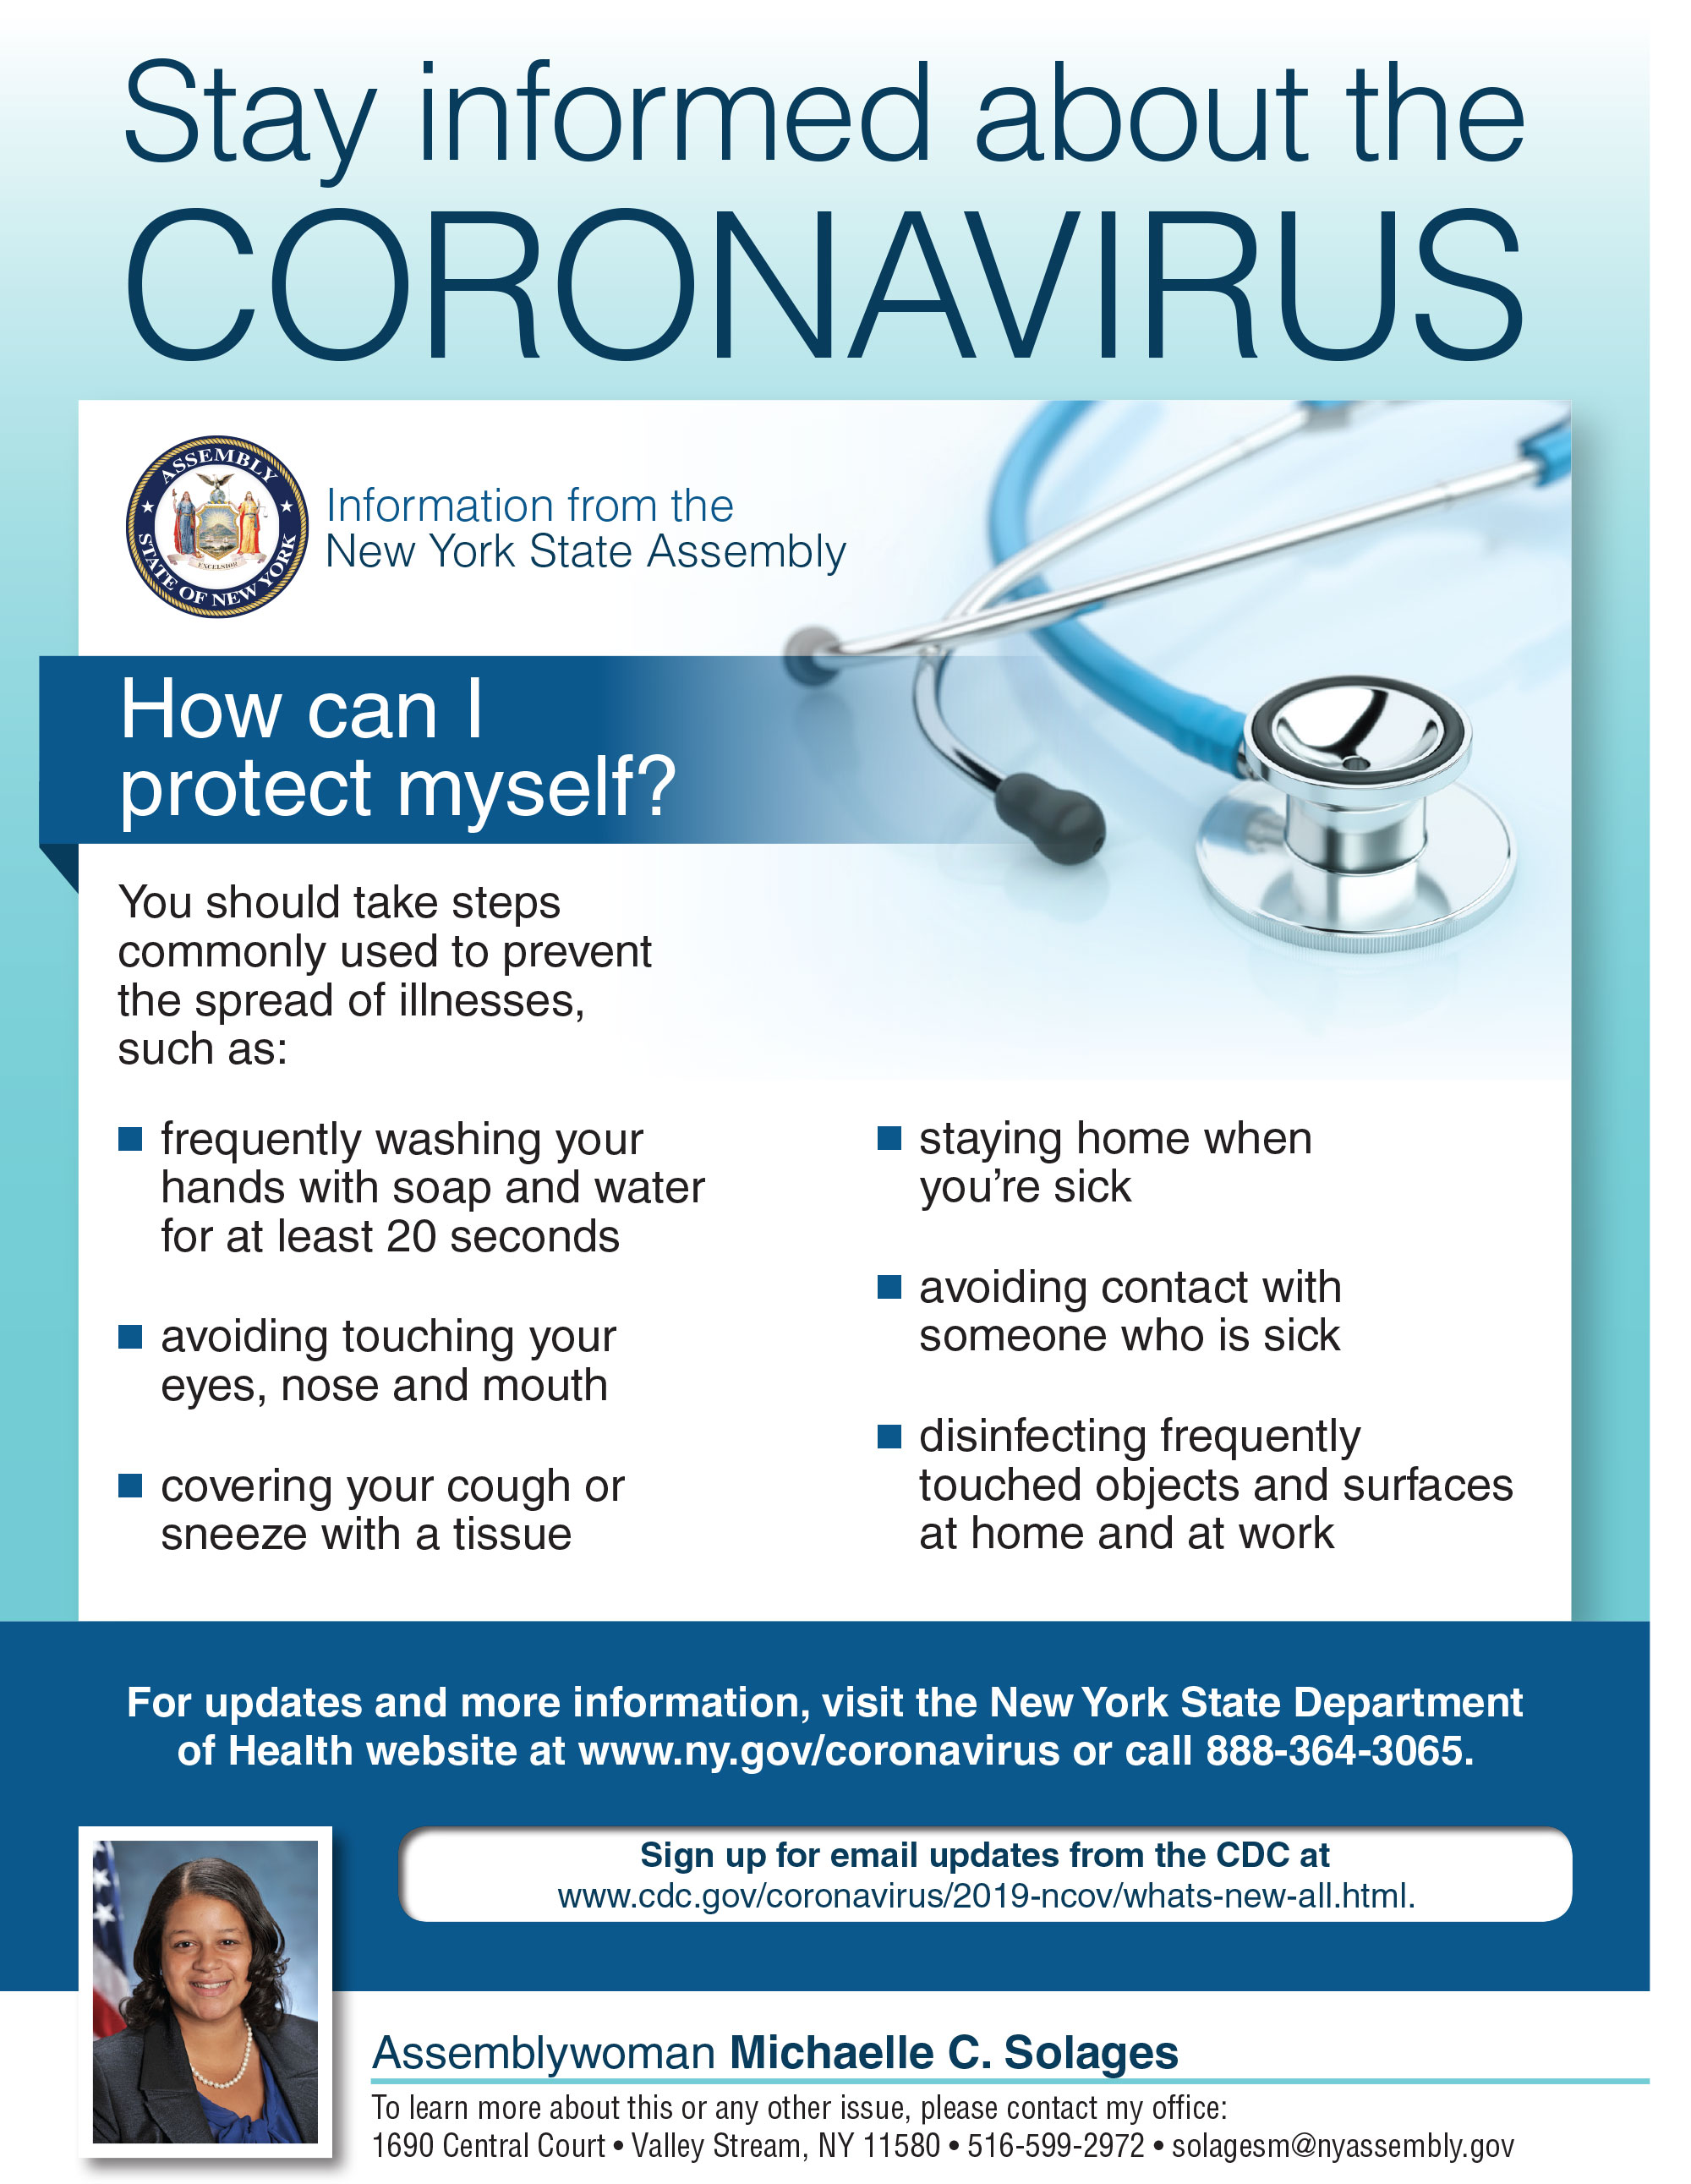 Stay informed about the Coronavirus - How can I protect myself?